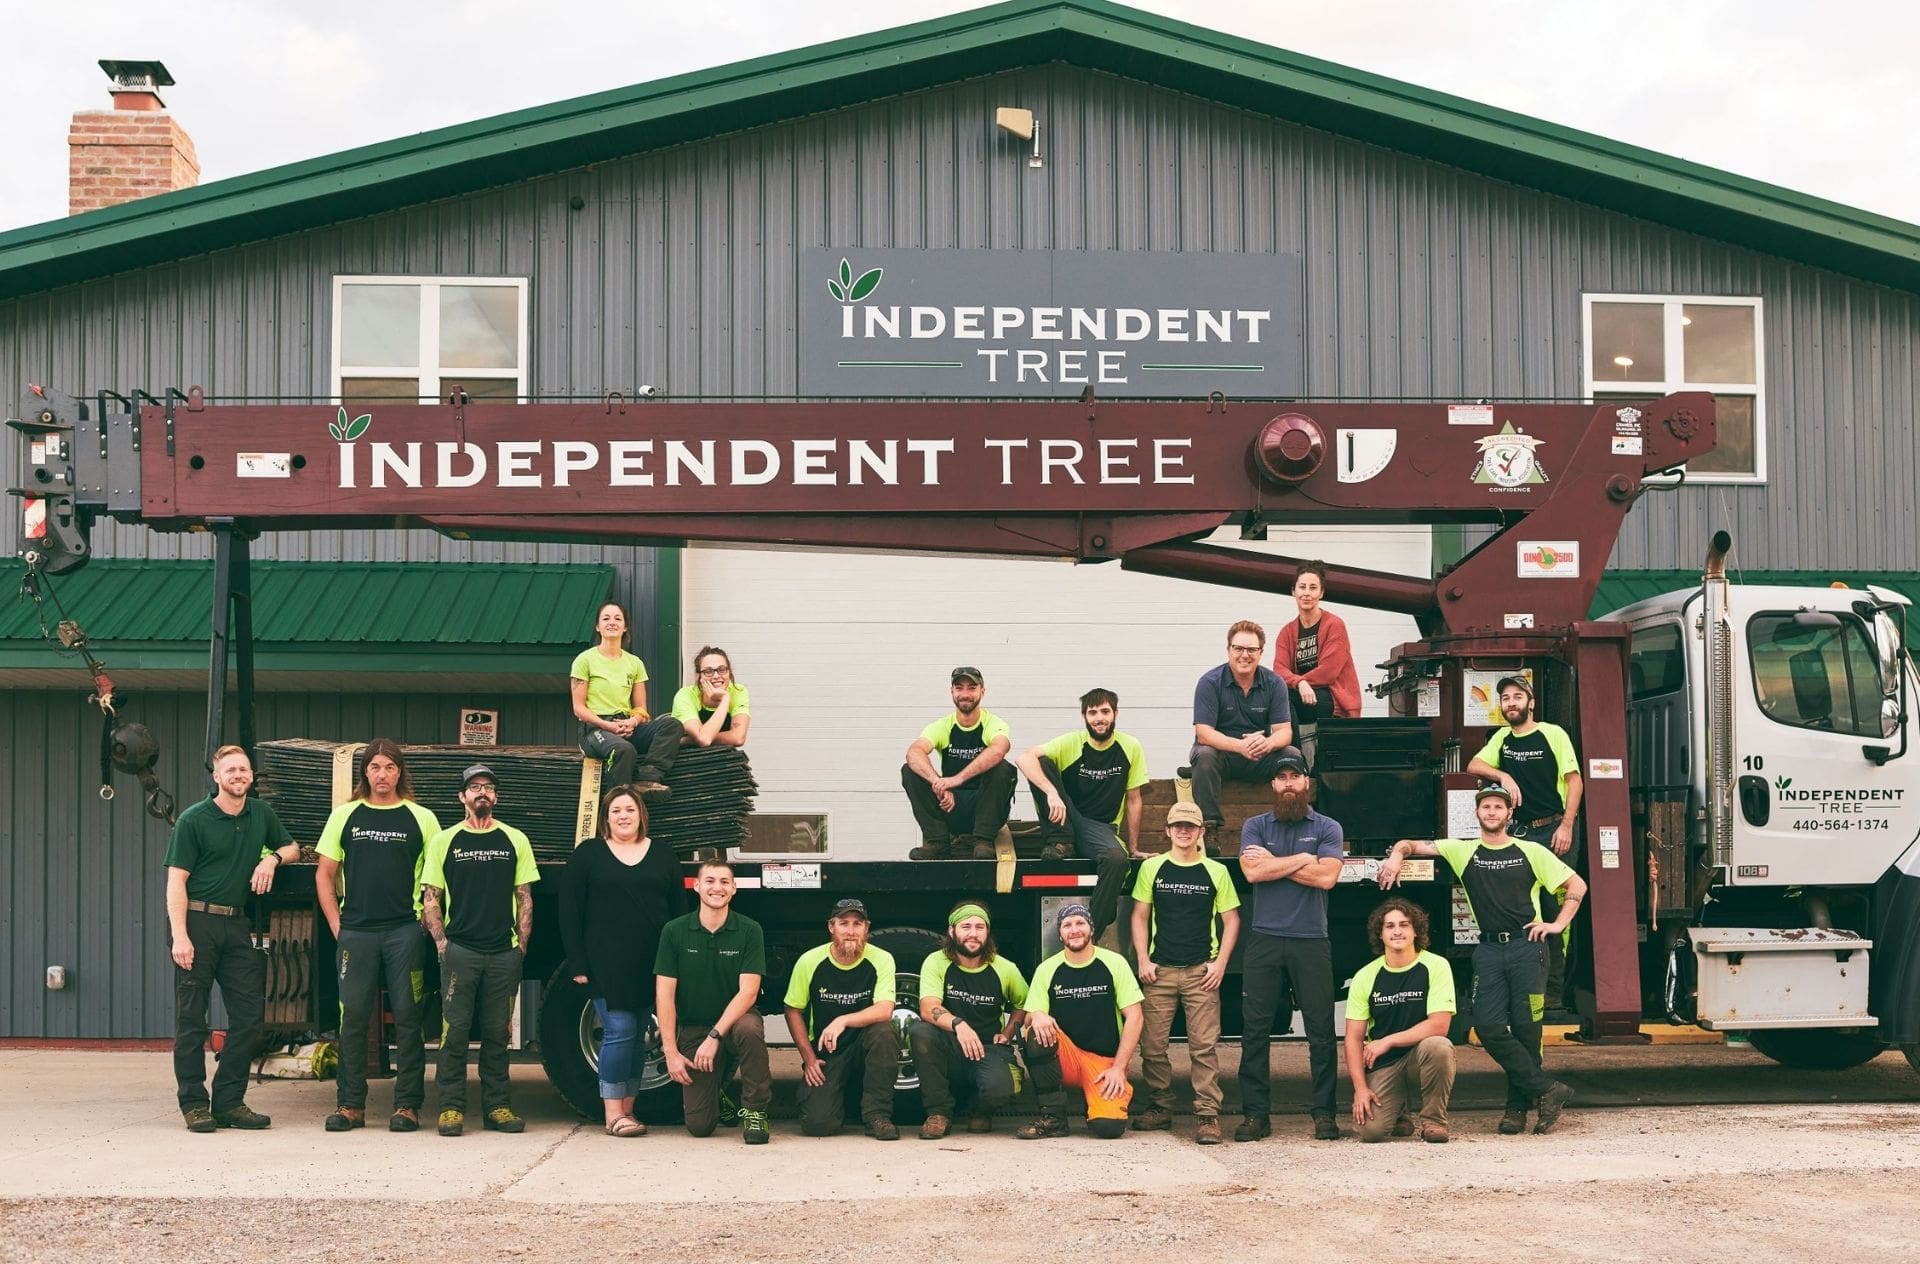 The Independent Tree Service team's group photo